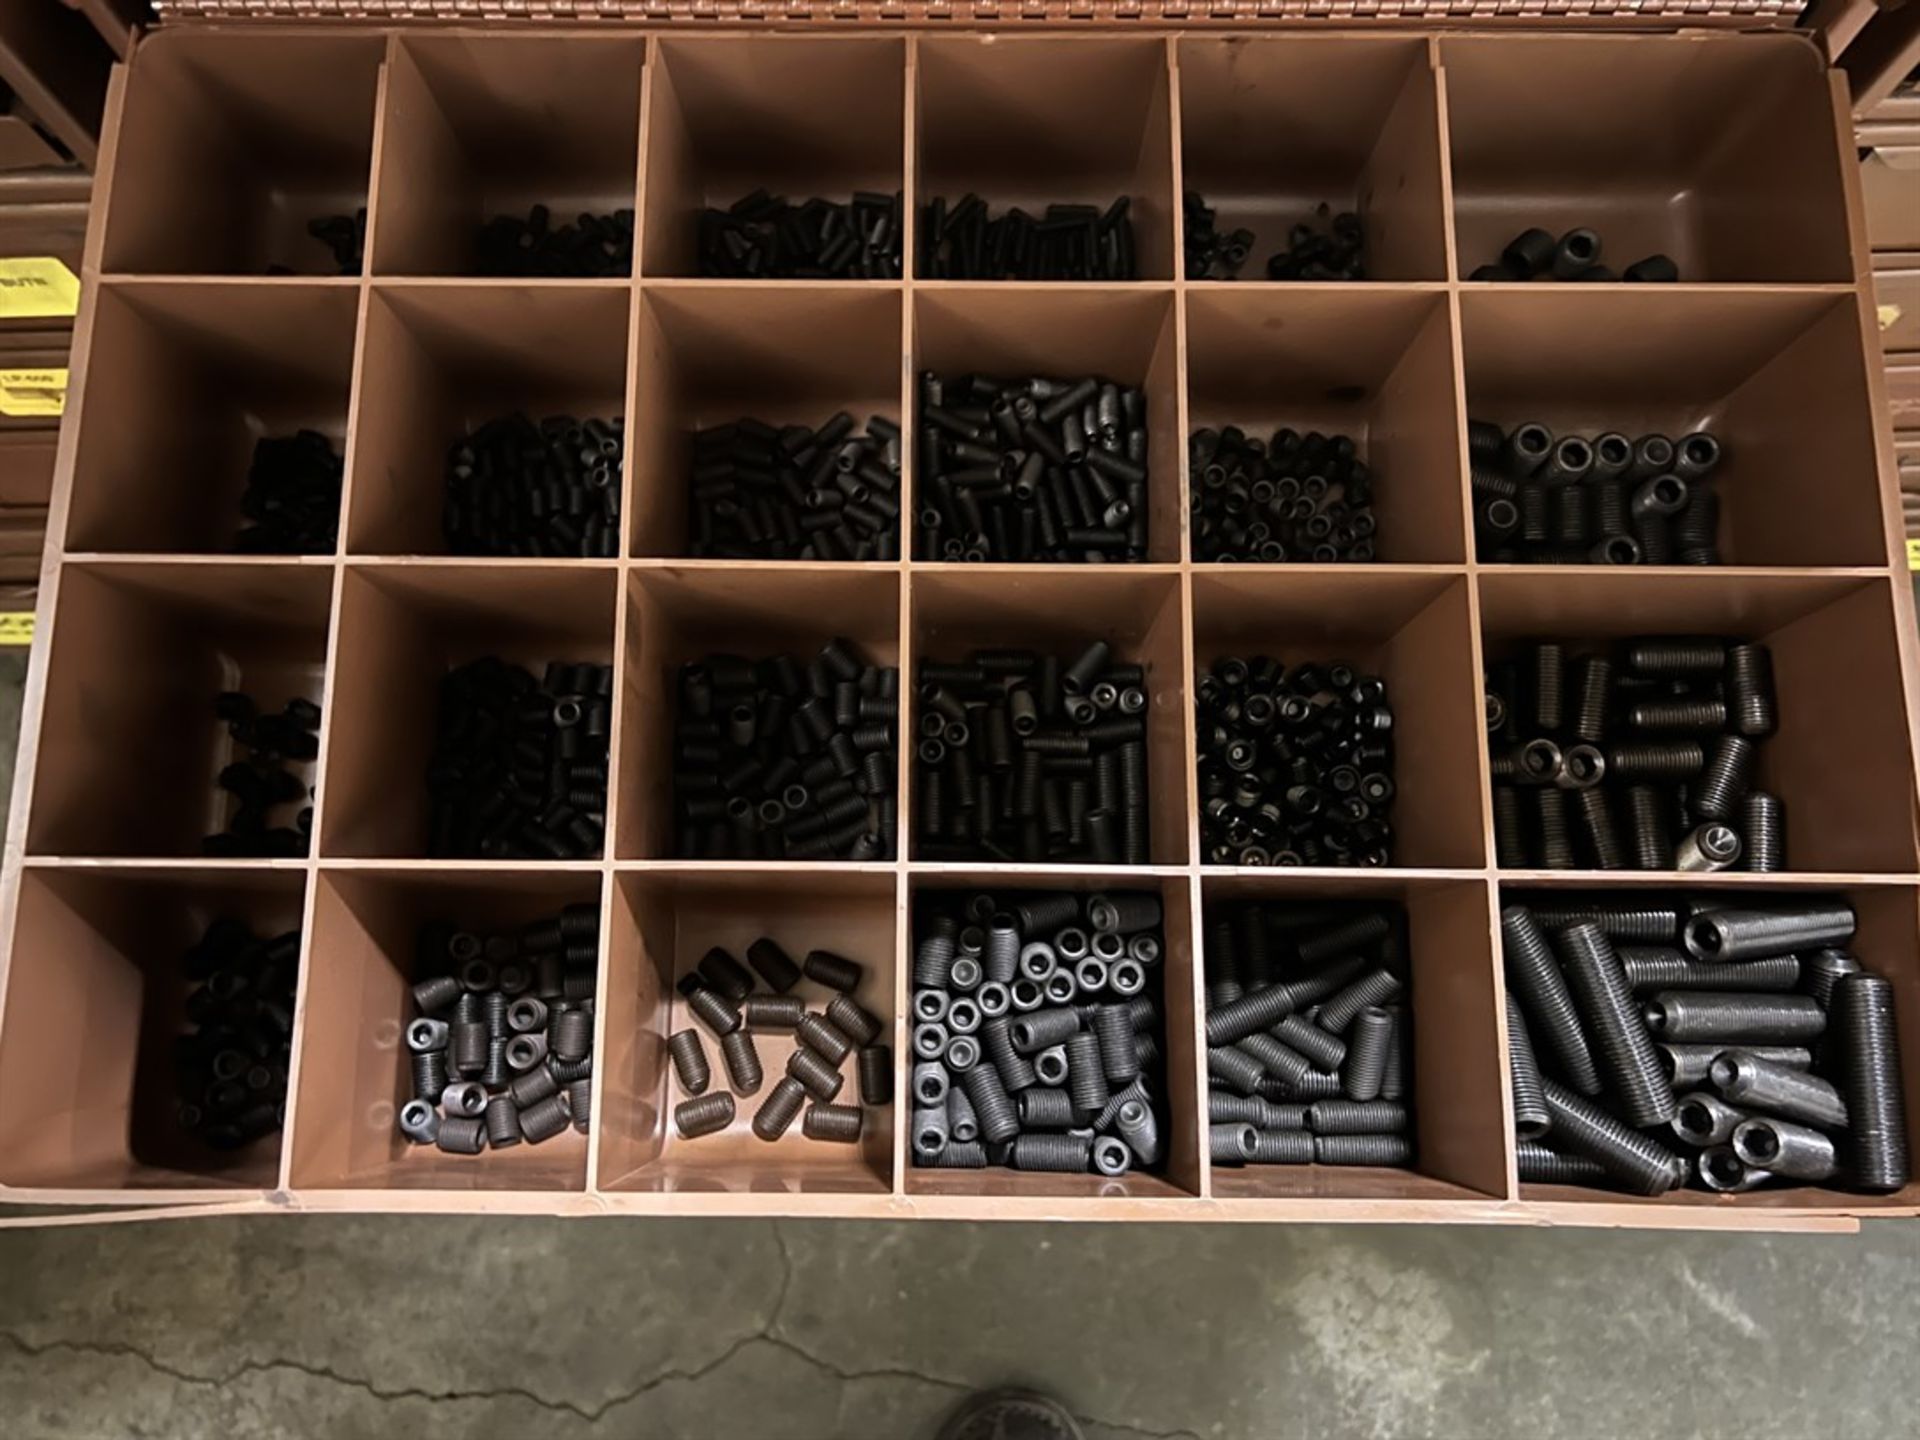 Lot of (4) Stacks of LAWSON Hardware Organizers w/ Assorted Machine Screws, Toggle Bolts, O-Rings, - Image 11 of 17